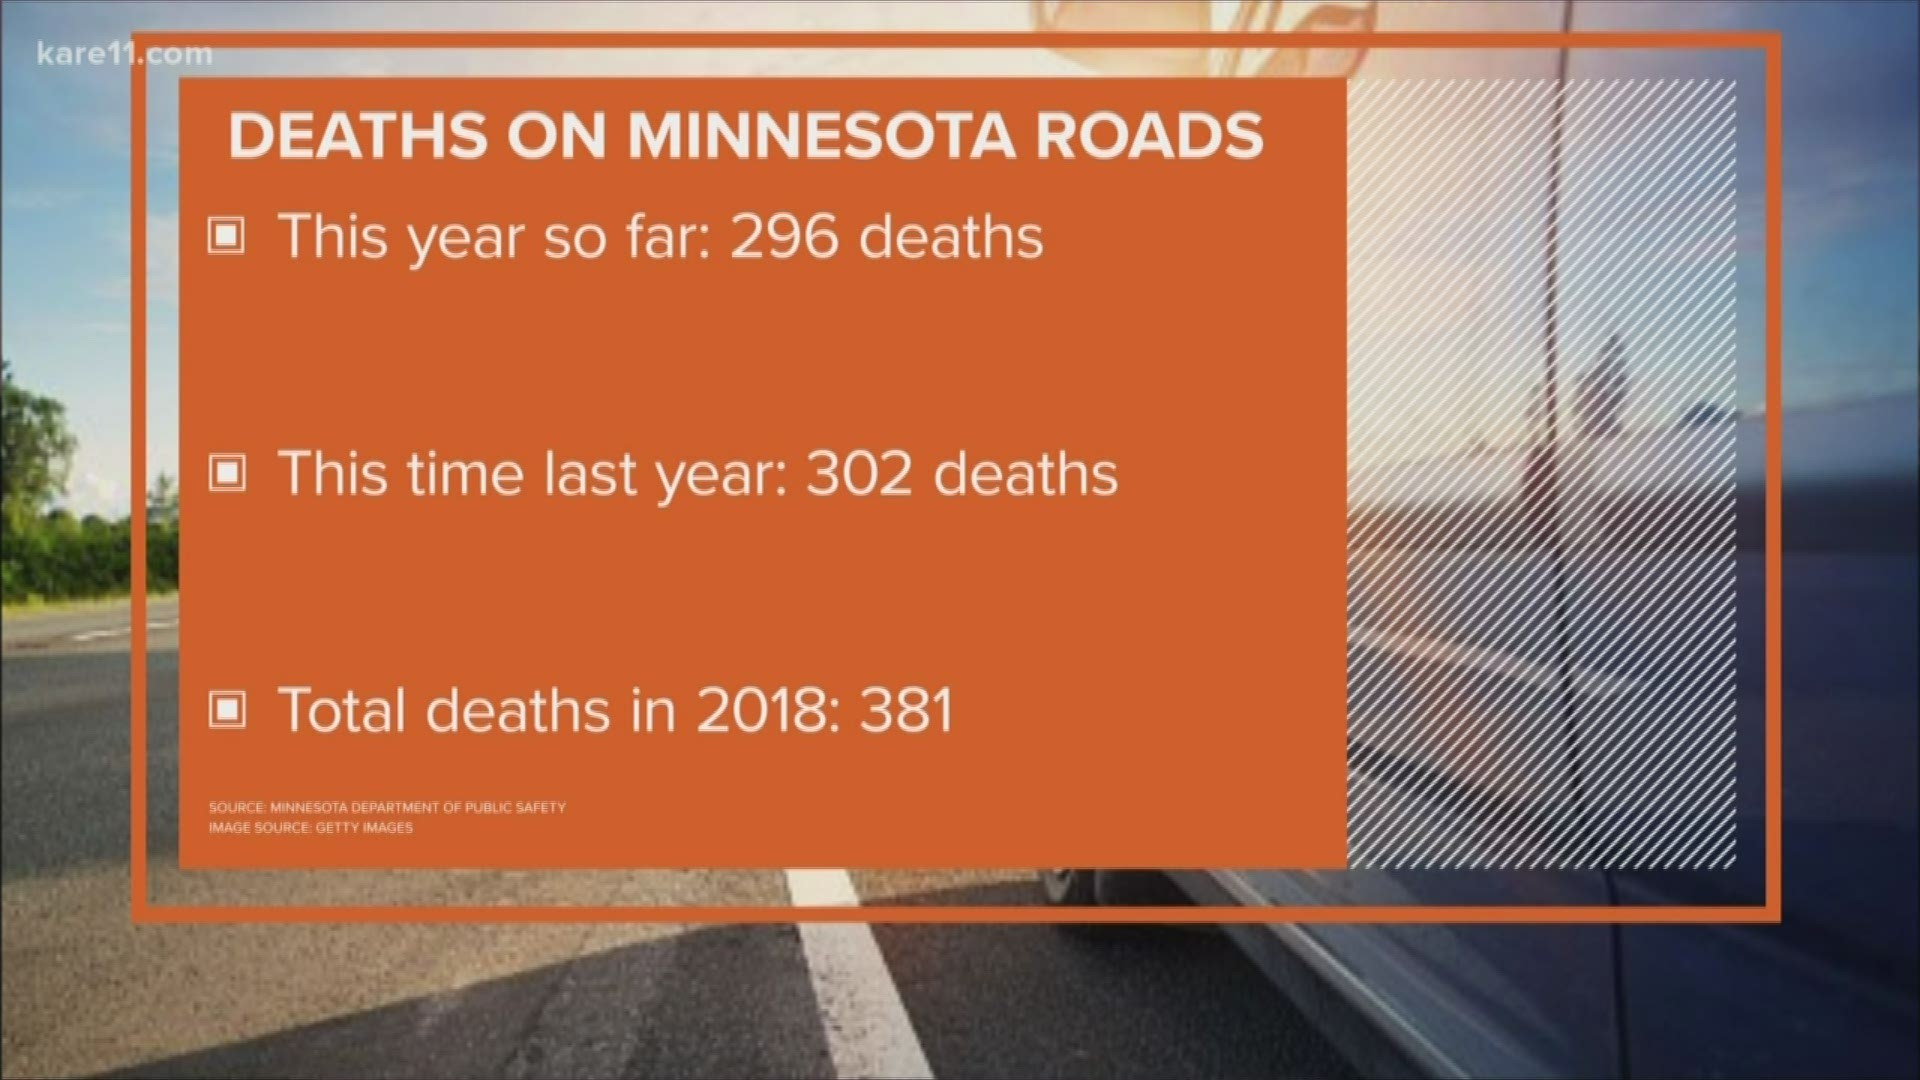 Every year, the TZD (Toward Zero Deaths) Conference is held to discuss ways of reducing deadly and life-altering crashes on Minnesota roads.